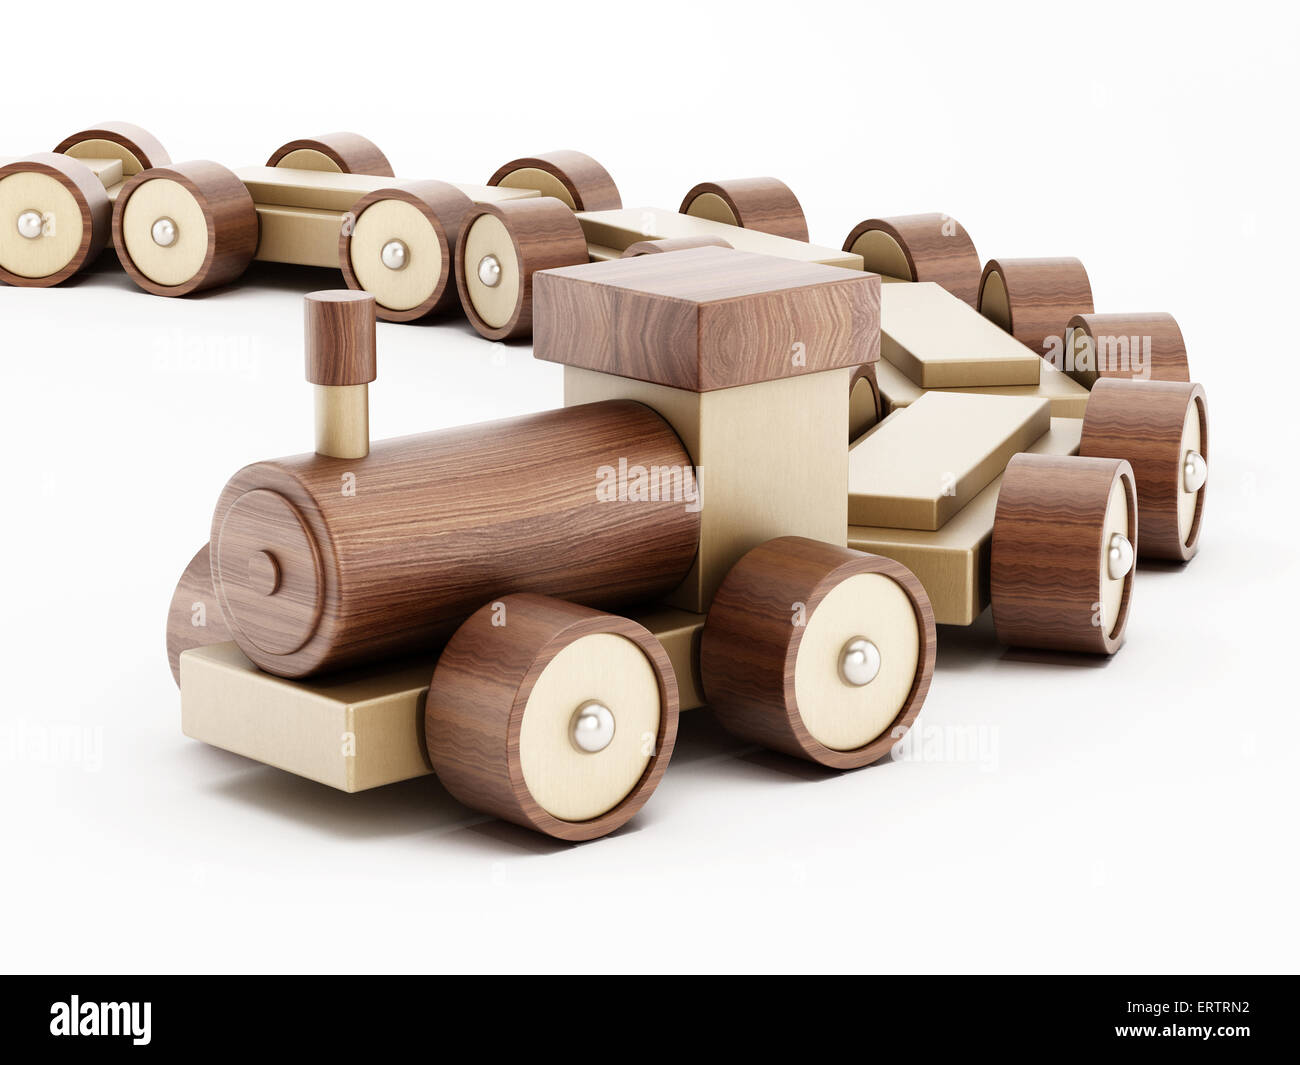 Toy wooden train isolated on white background Stock Photo